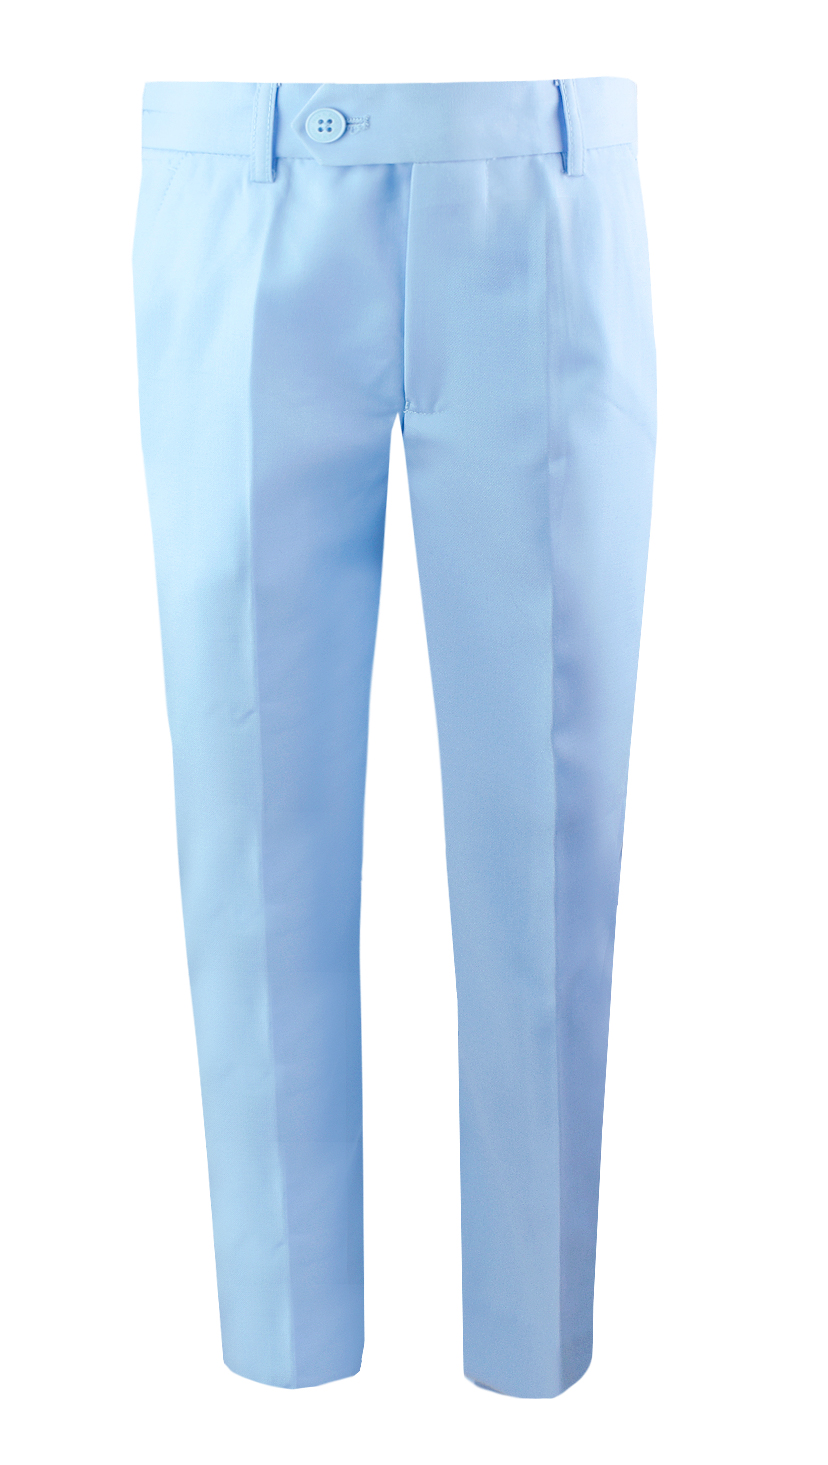 Black n Bianco Boys' First Class Slim Fit Flat Front Trouser Pants in Light  Blue